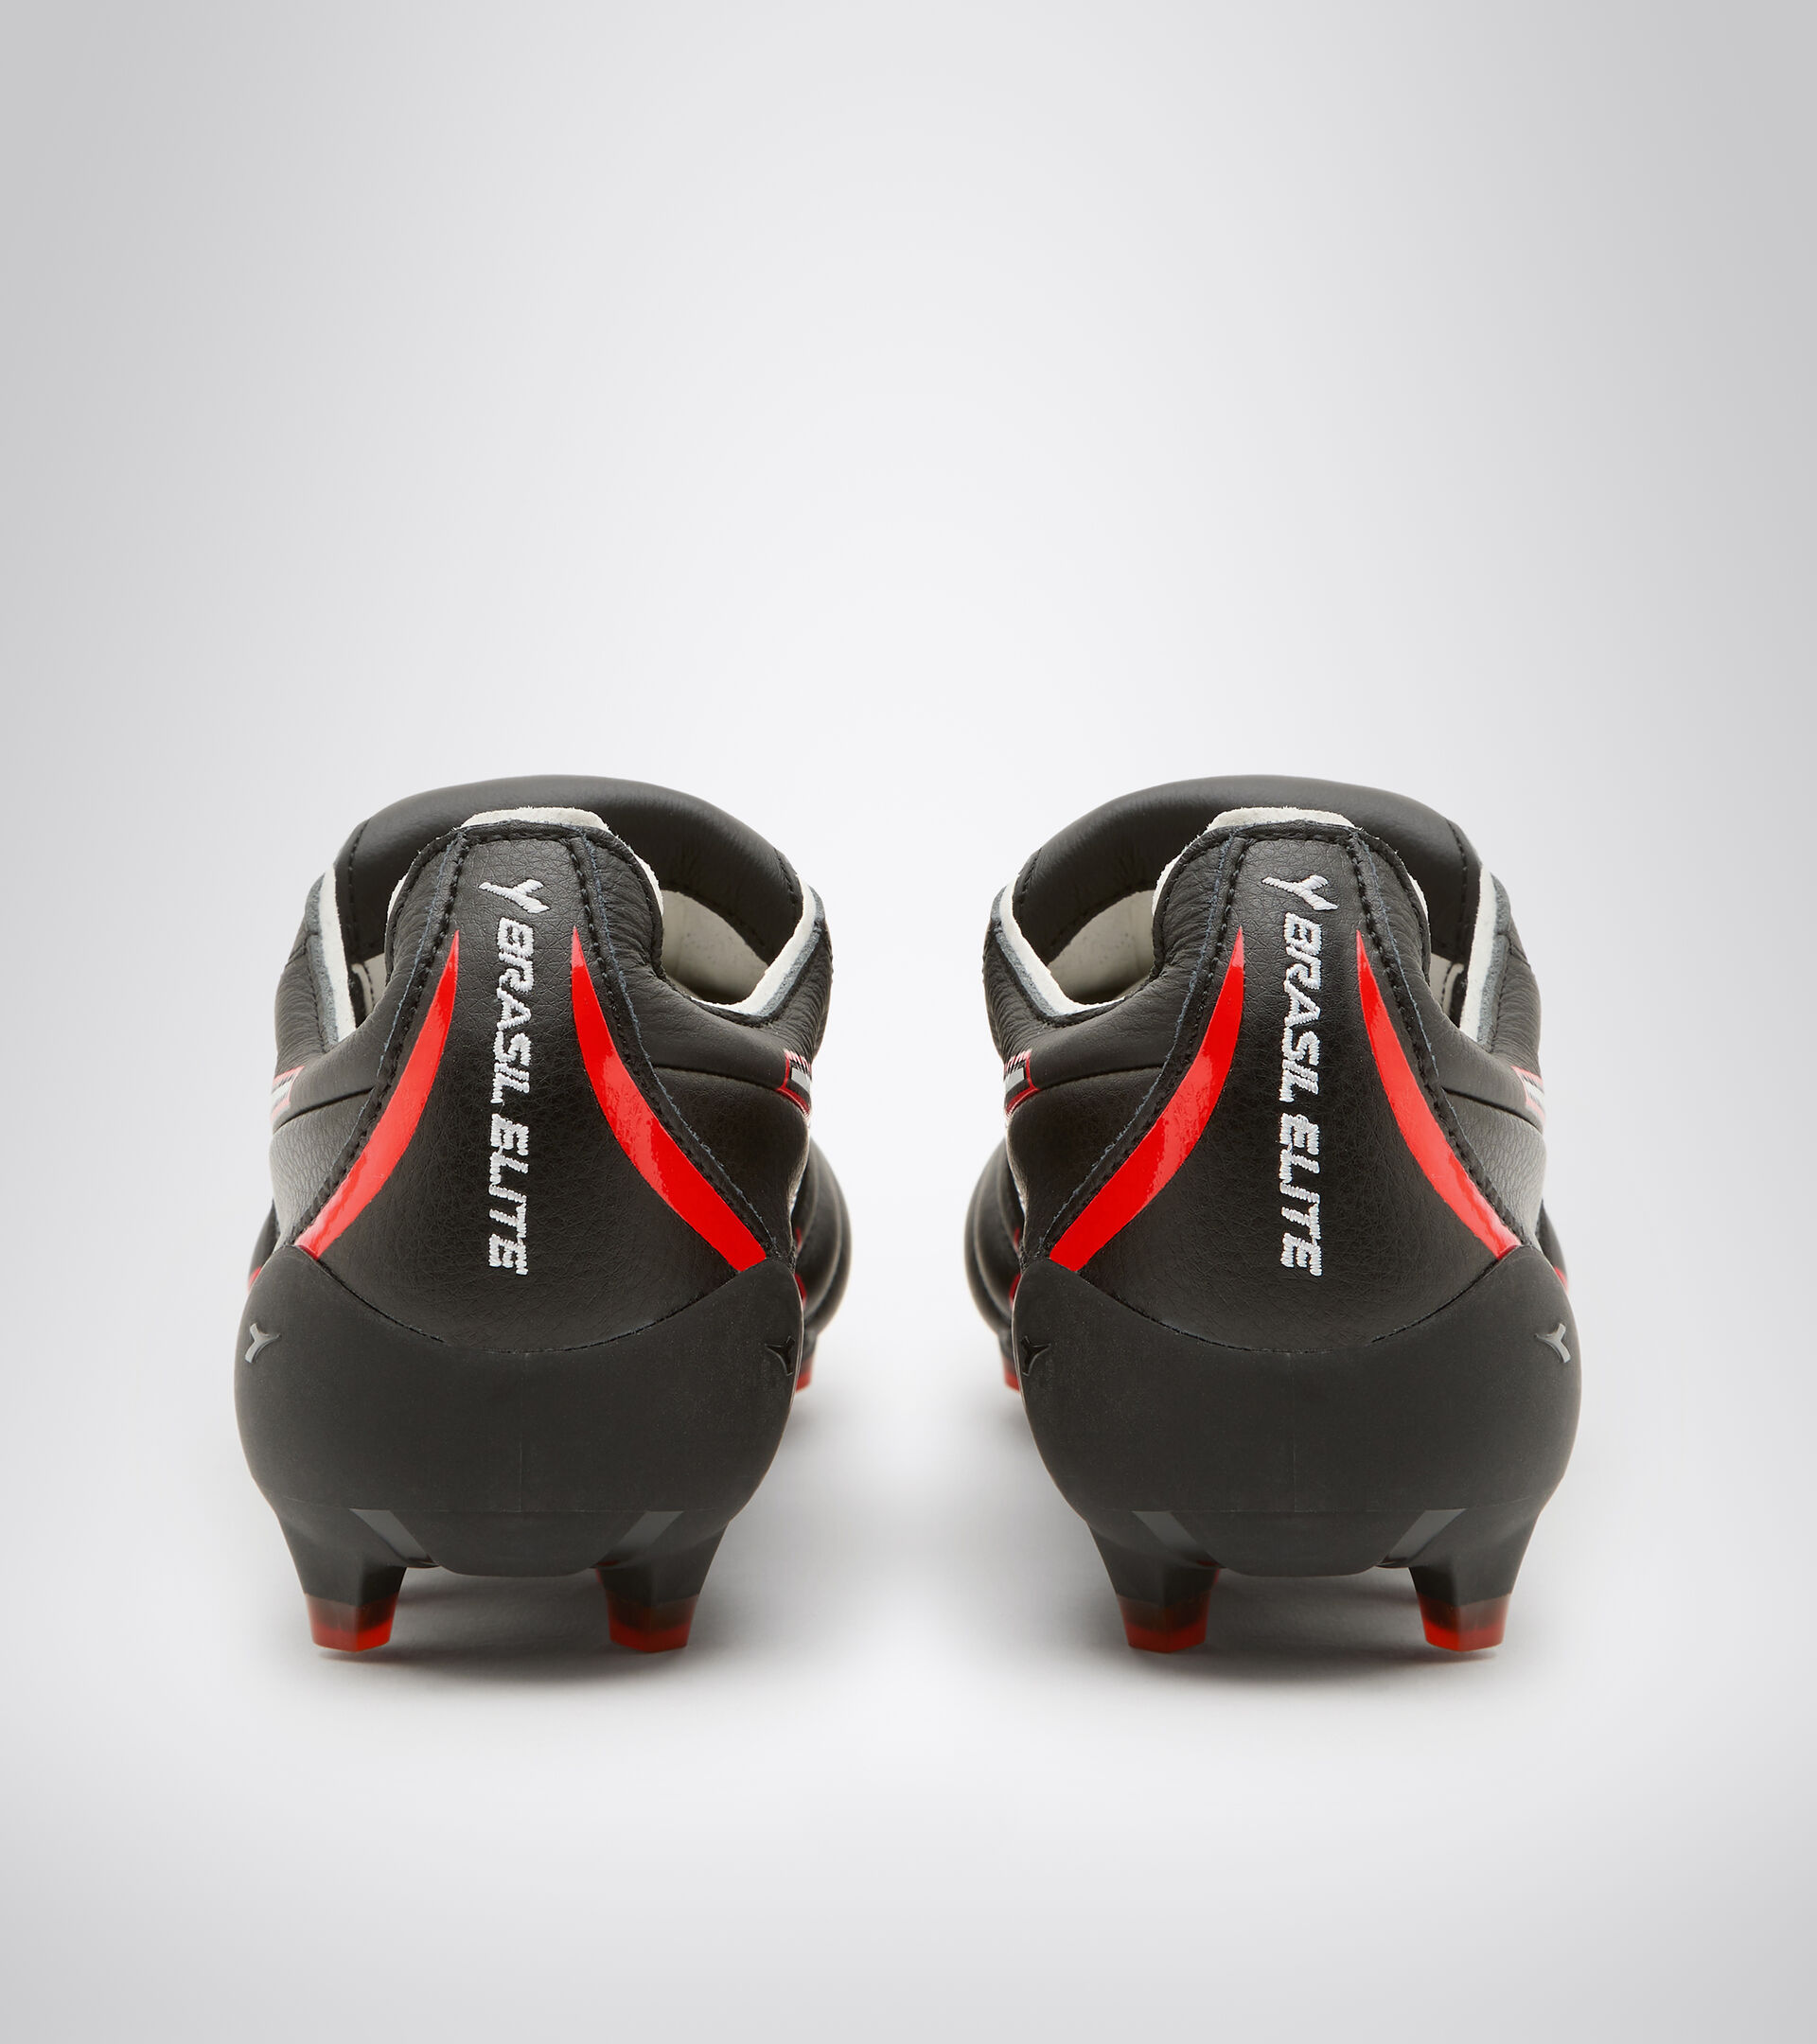 Firm ground football boots - Made in Italy BRASIL ELITE TECH T ITA LPX BLACK/WHITE/FLUO RED - Diadora